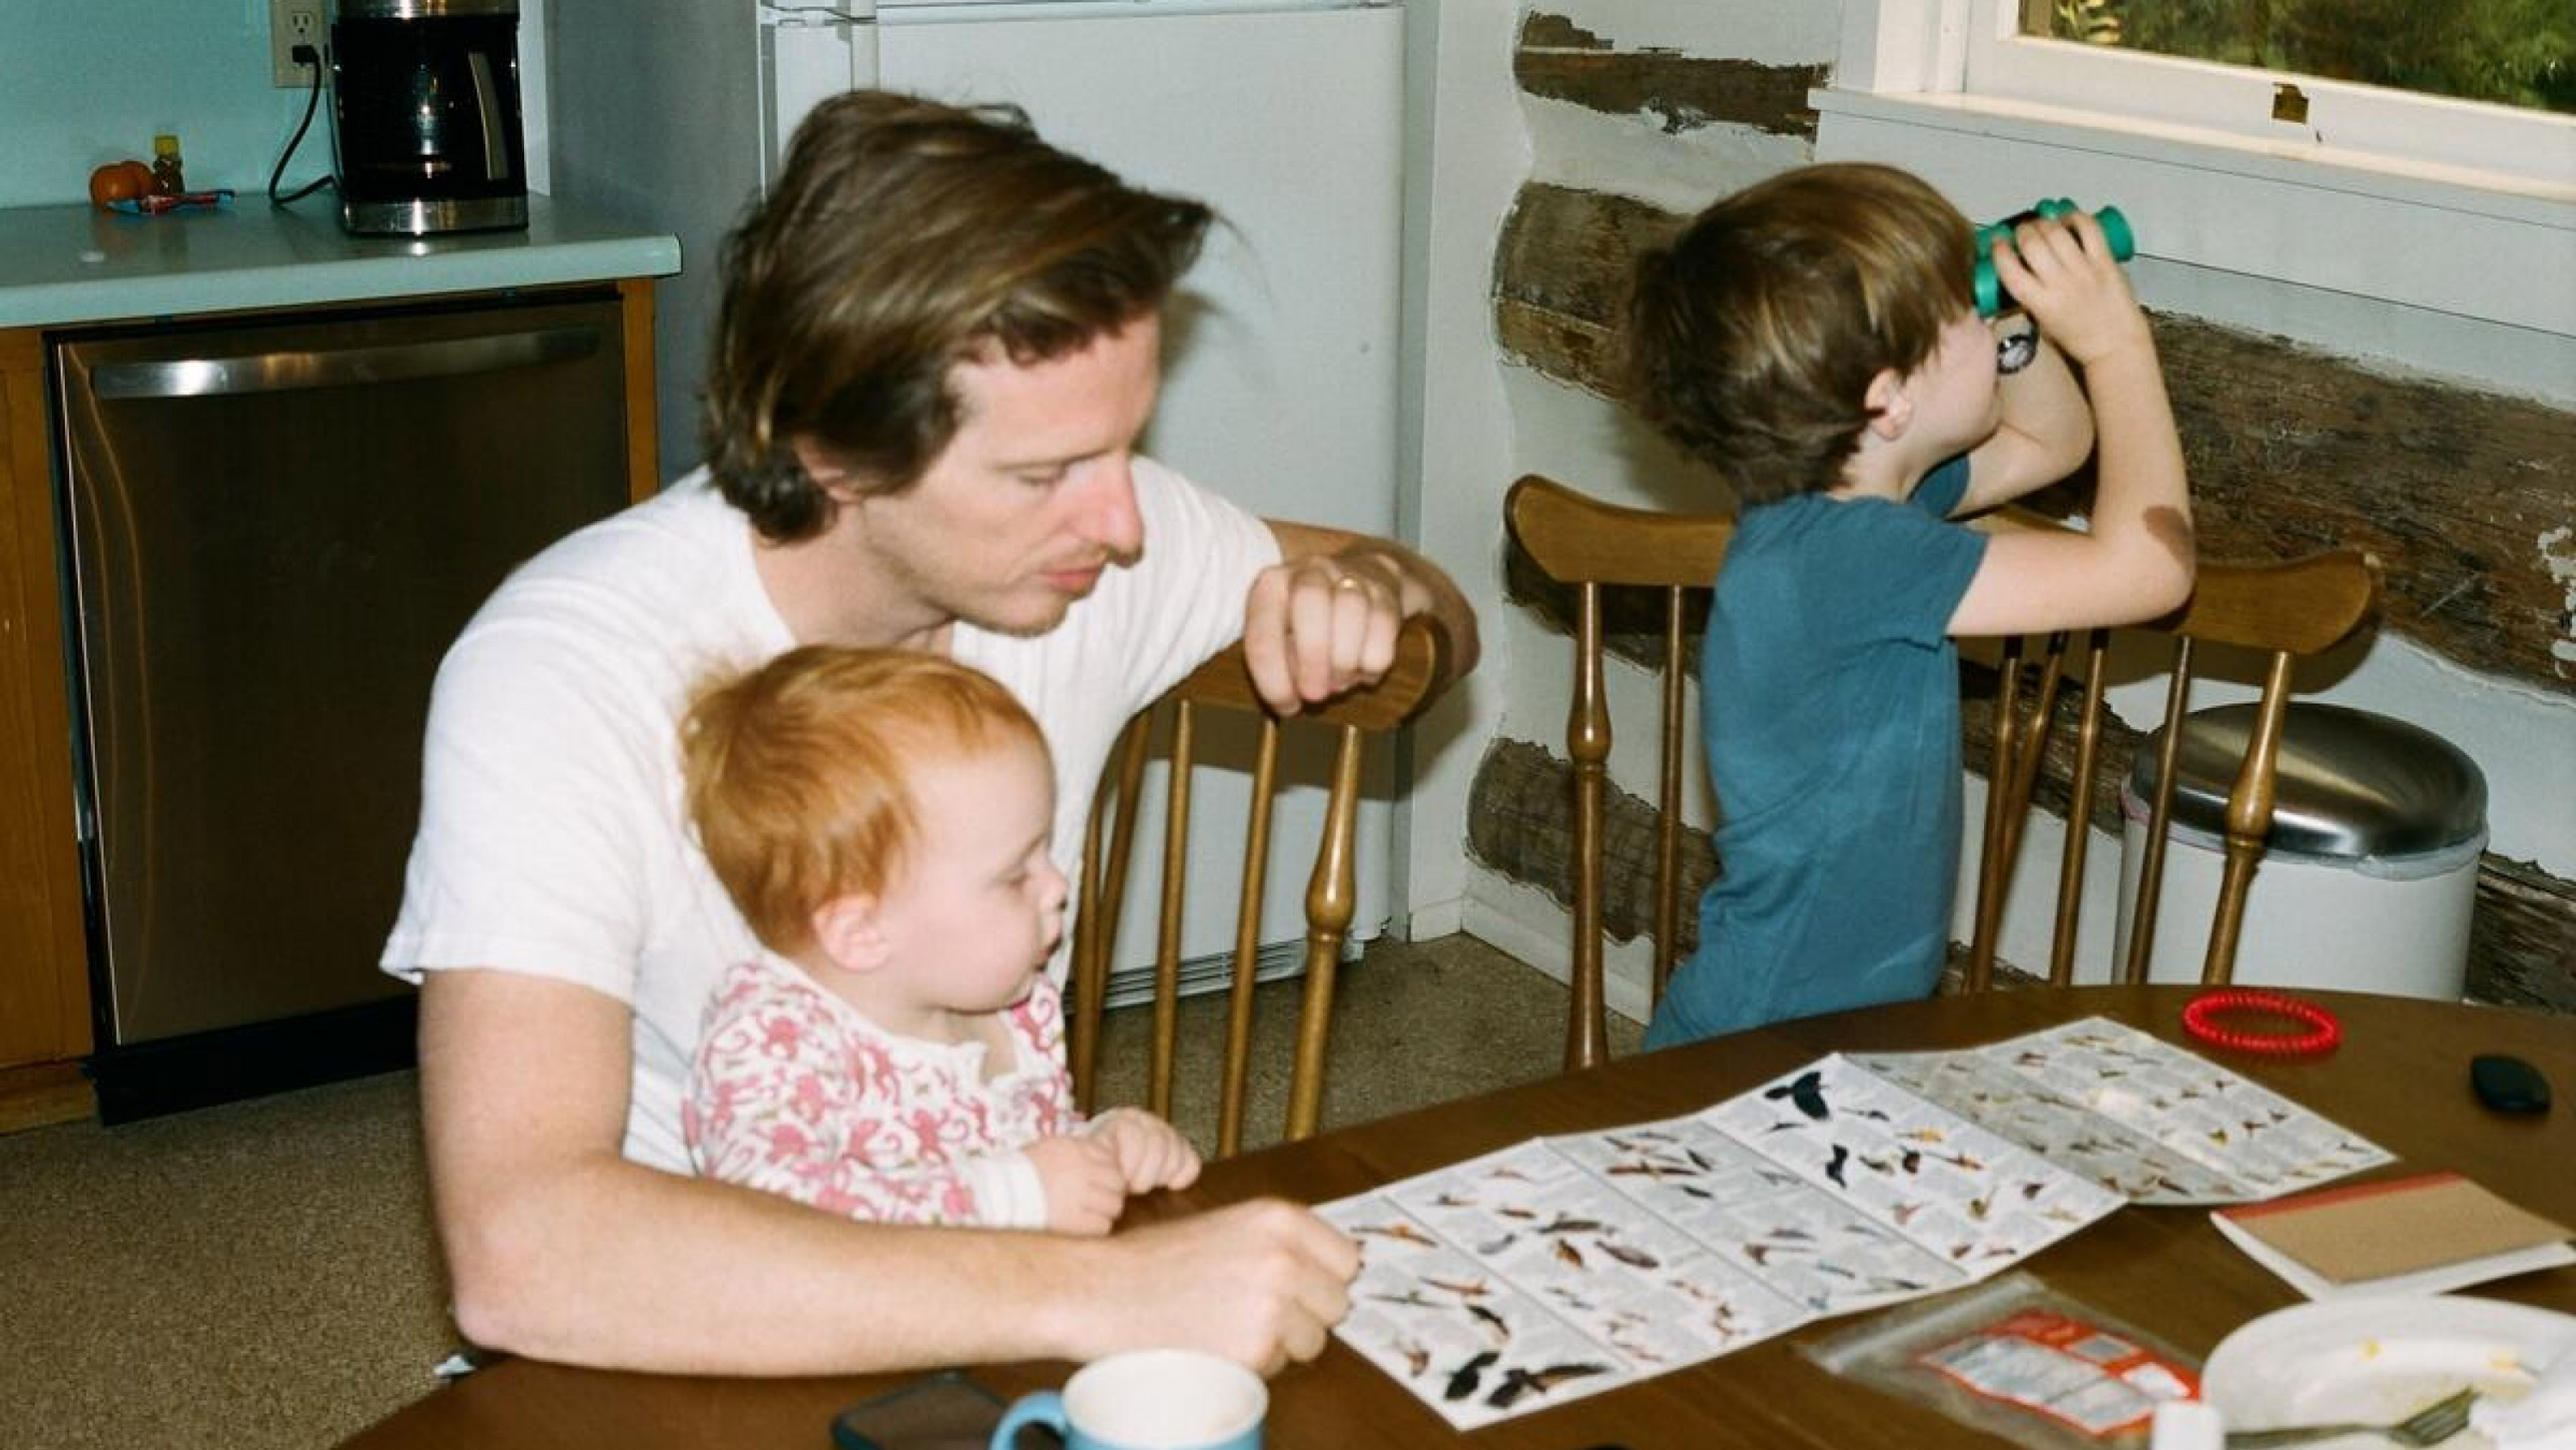 A man sits at a table with a toddler on his lap, looking at a pamphlet about birds. A young boy plays with binoculars nearby.